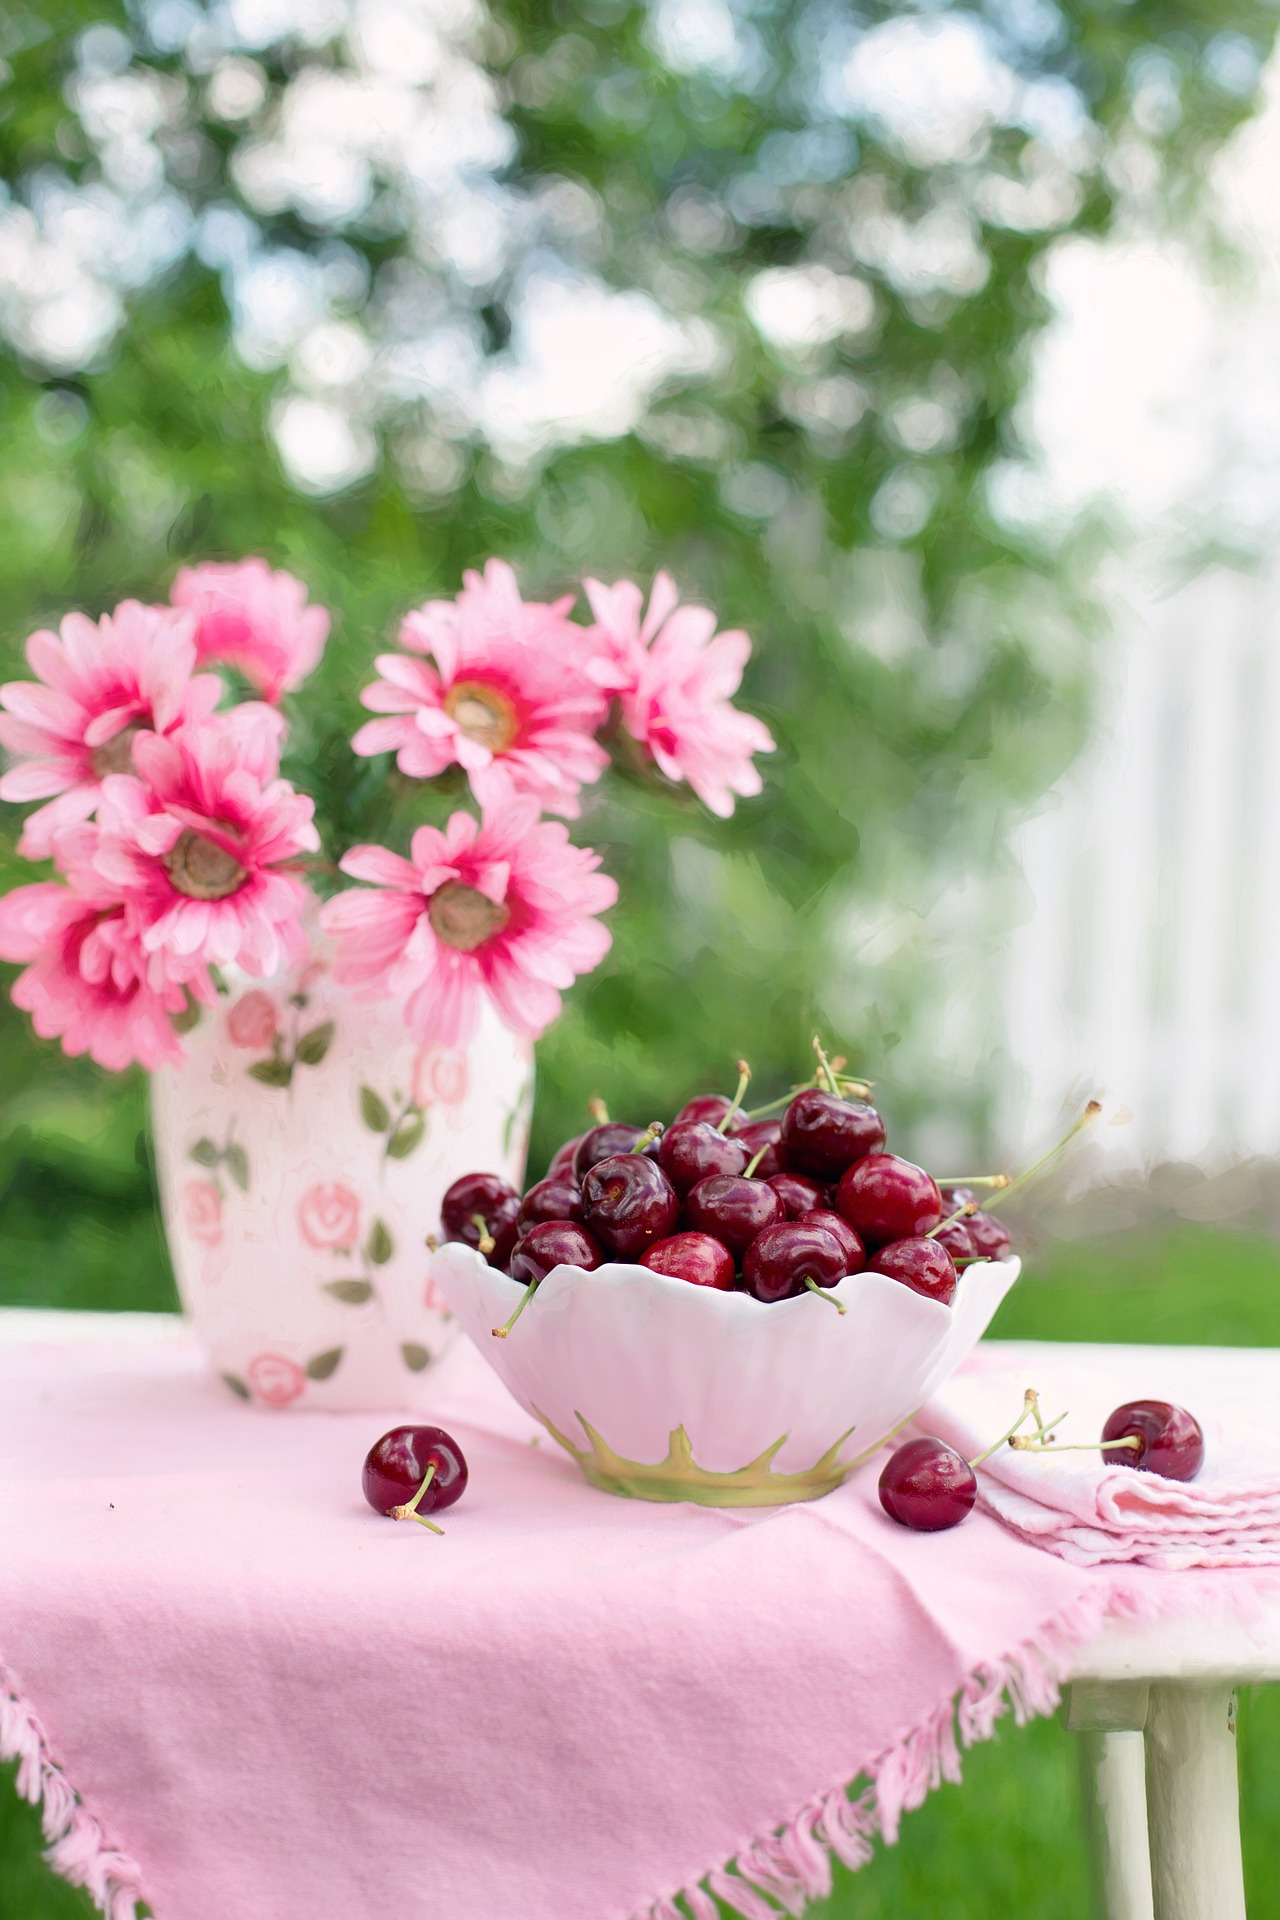 Cherries in a bowl photo